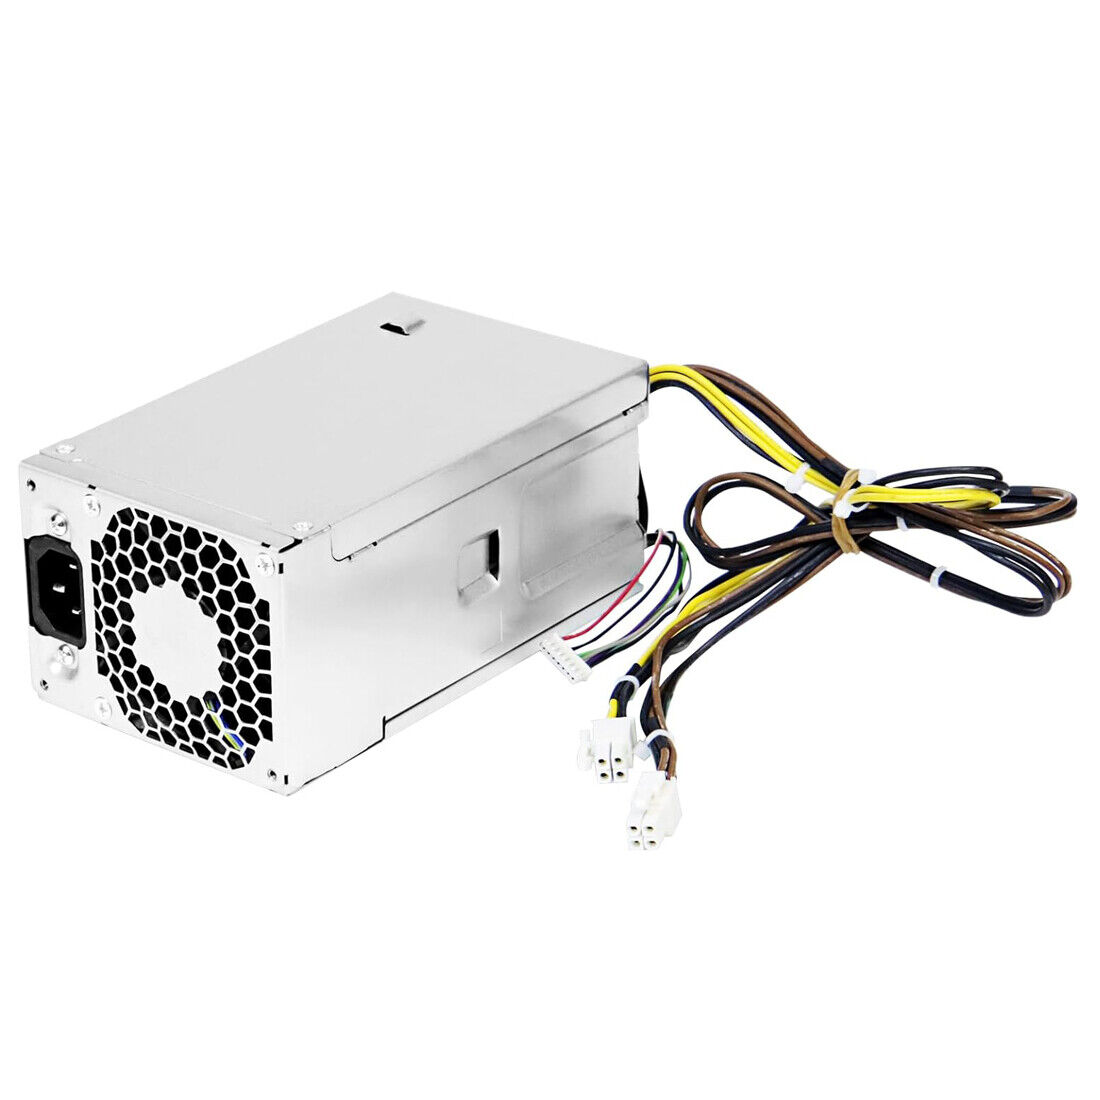 New D16-250P1A 250W Power Supply Fit HP ProDesk 280 282 600 800 G3 480 400 G4